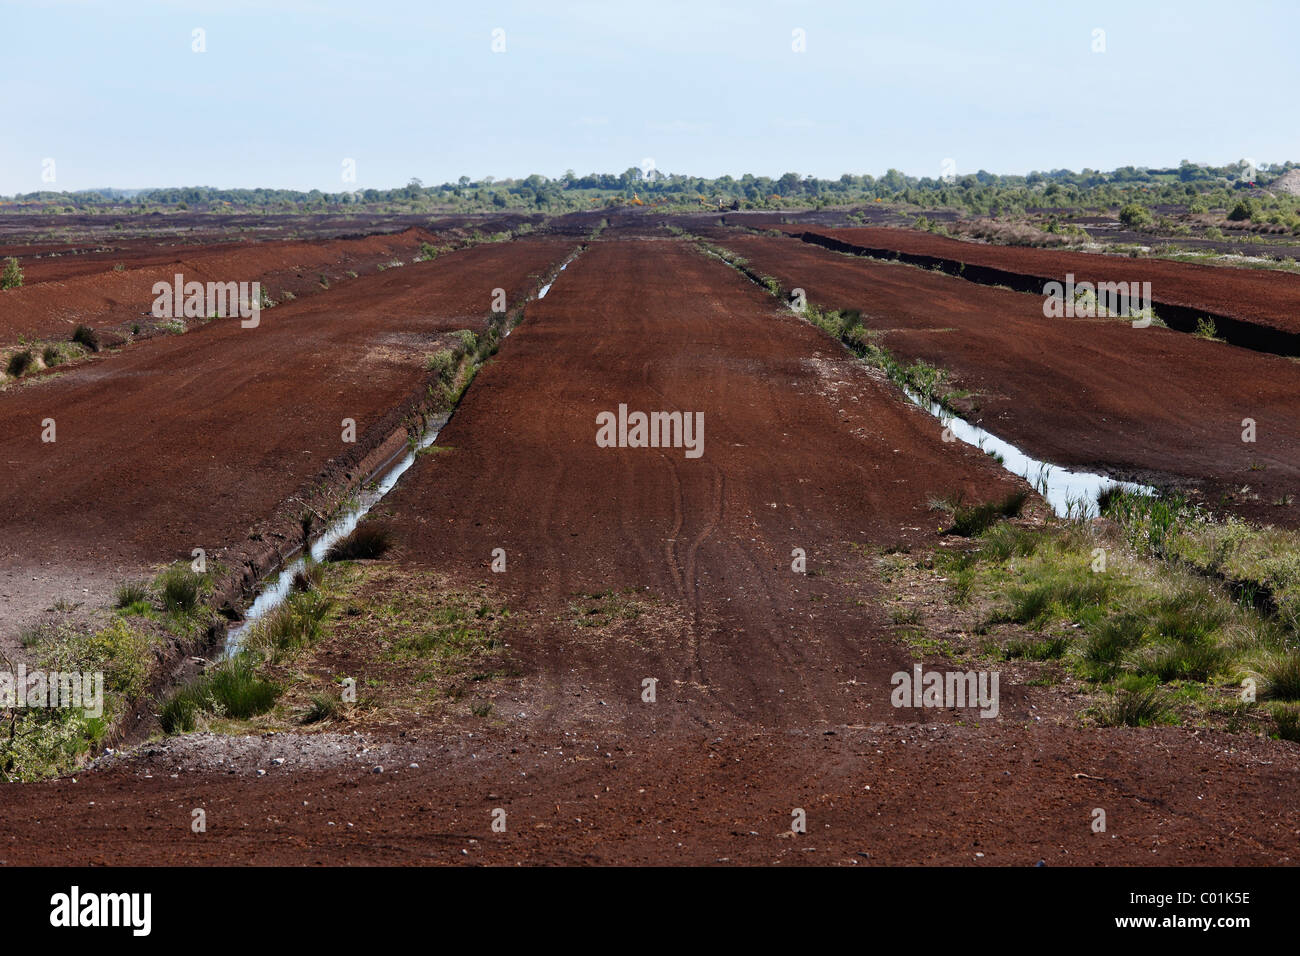 Peat harvest, Tullamore, County Offaly, Leinster province, Republic of Ireland, Europe Stock Photo